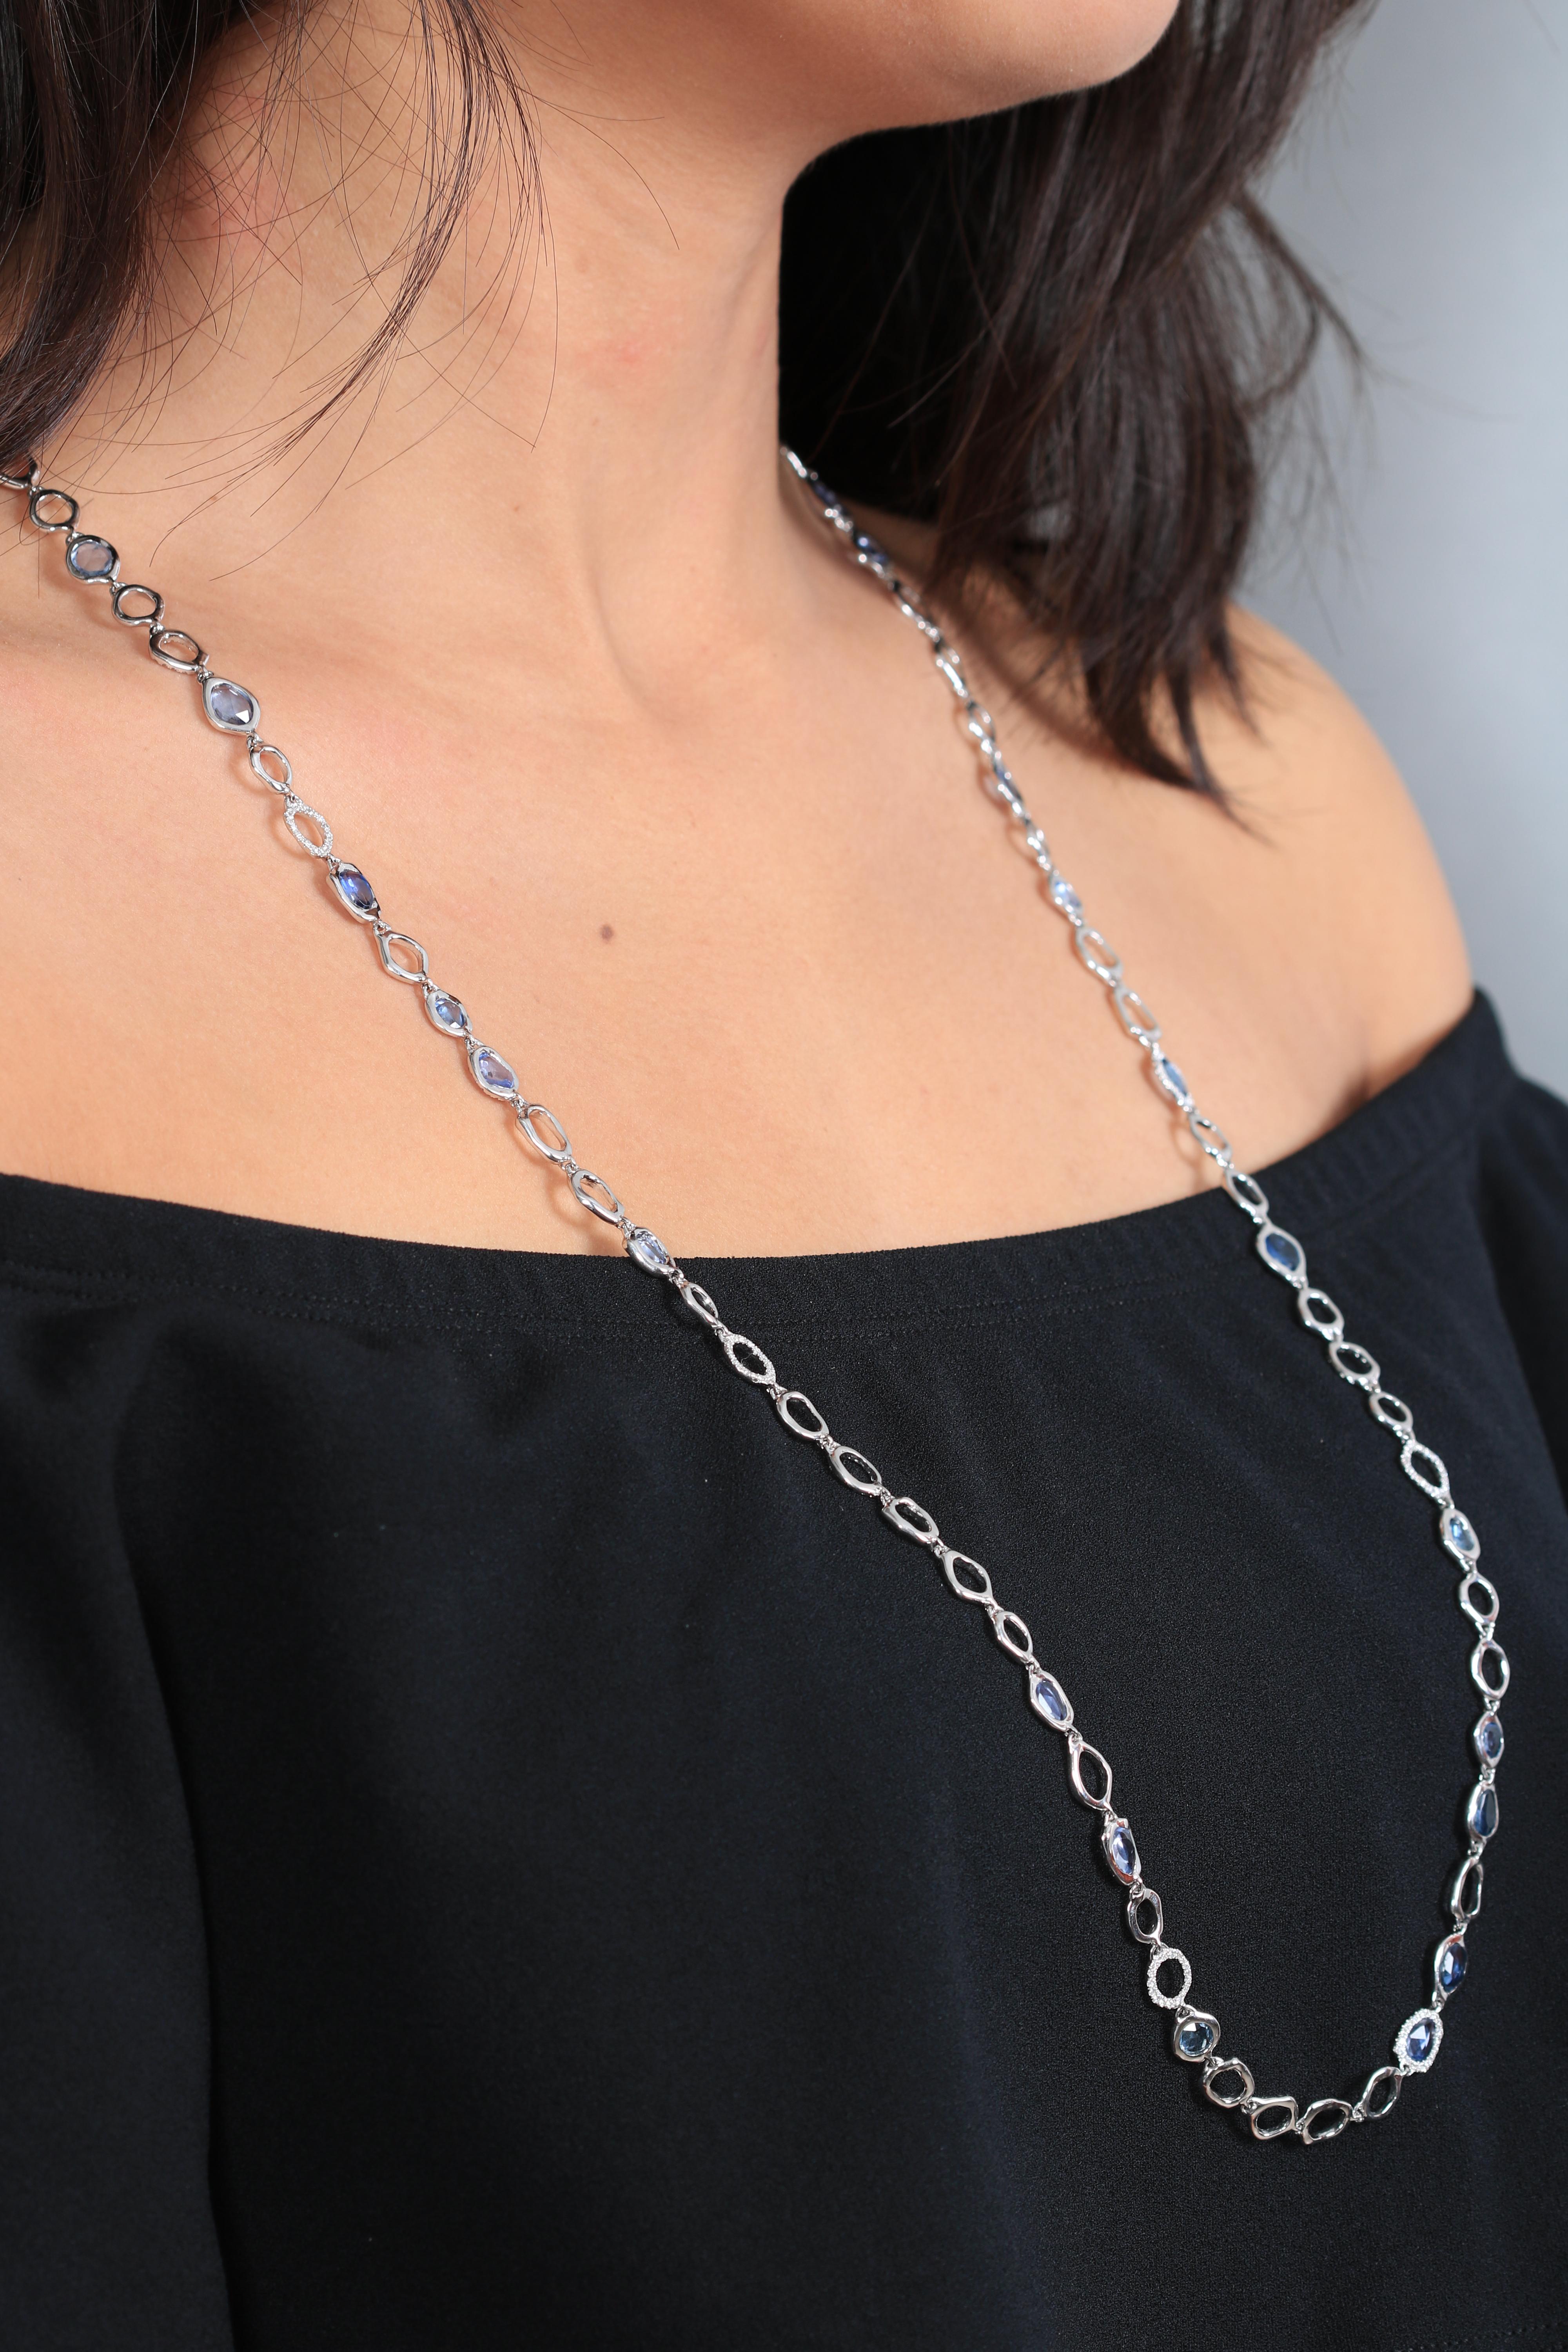 18 Karat White Gold Chain With Blue Sapphires In New Condition For Sale In Abu Dhabi, Abu Dhabi